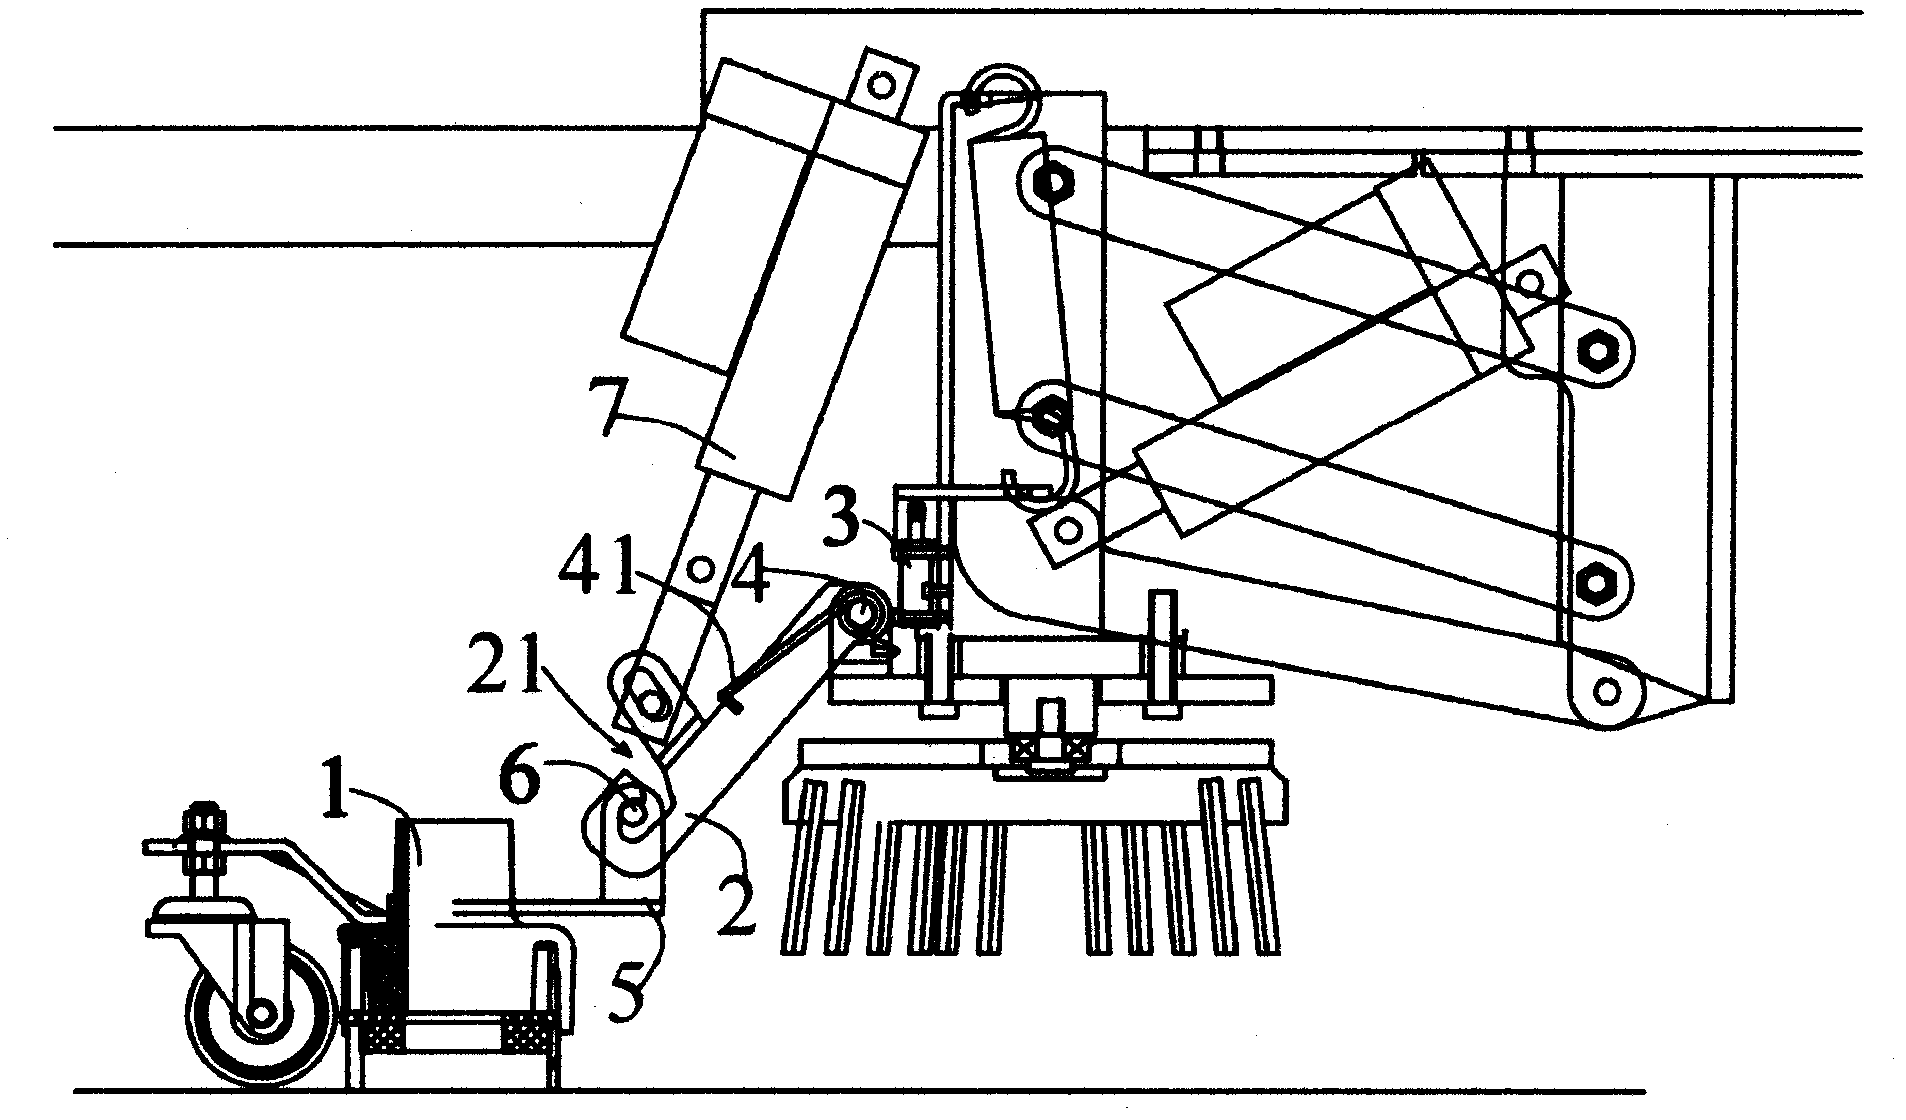 Force applying device used for ground washing vehicle wiper on ground